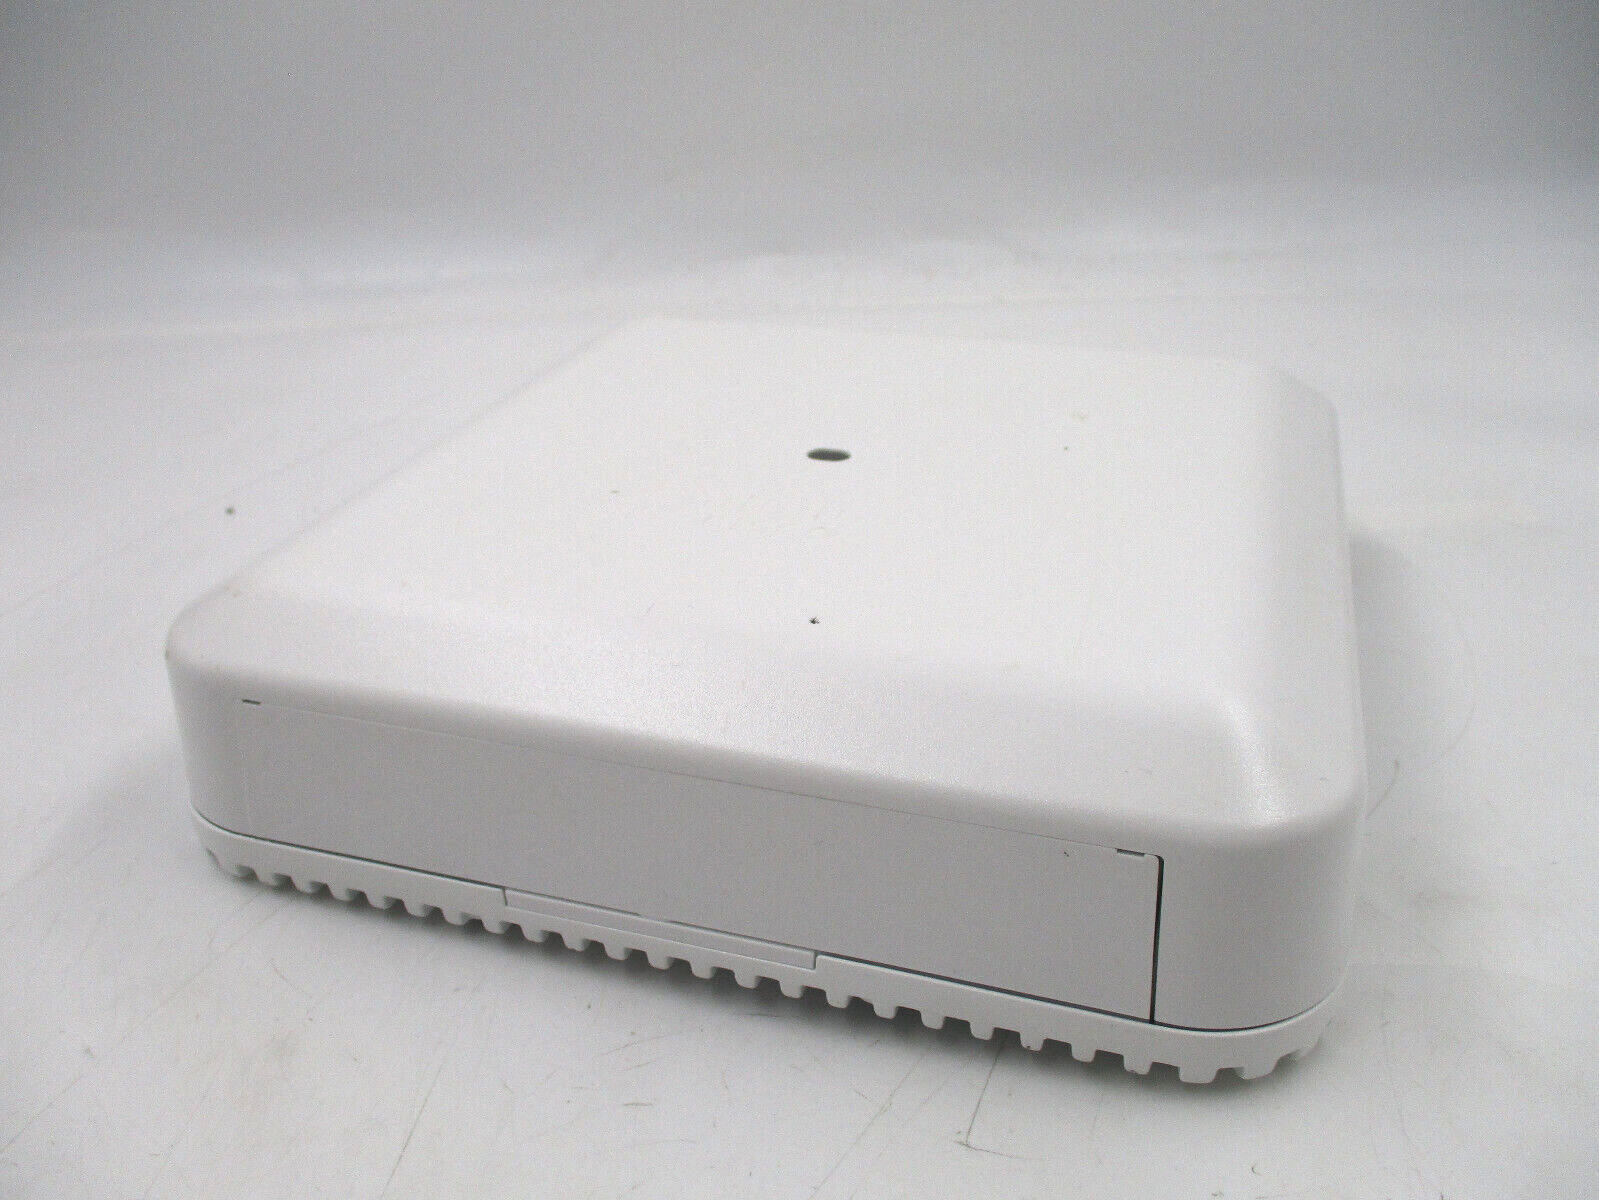 Cisco AIR-AP3802I-B-K9 Aironet 3802 Series Wireless Access Point Tested Working